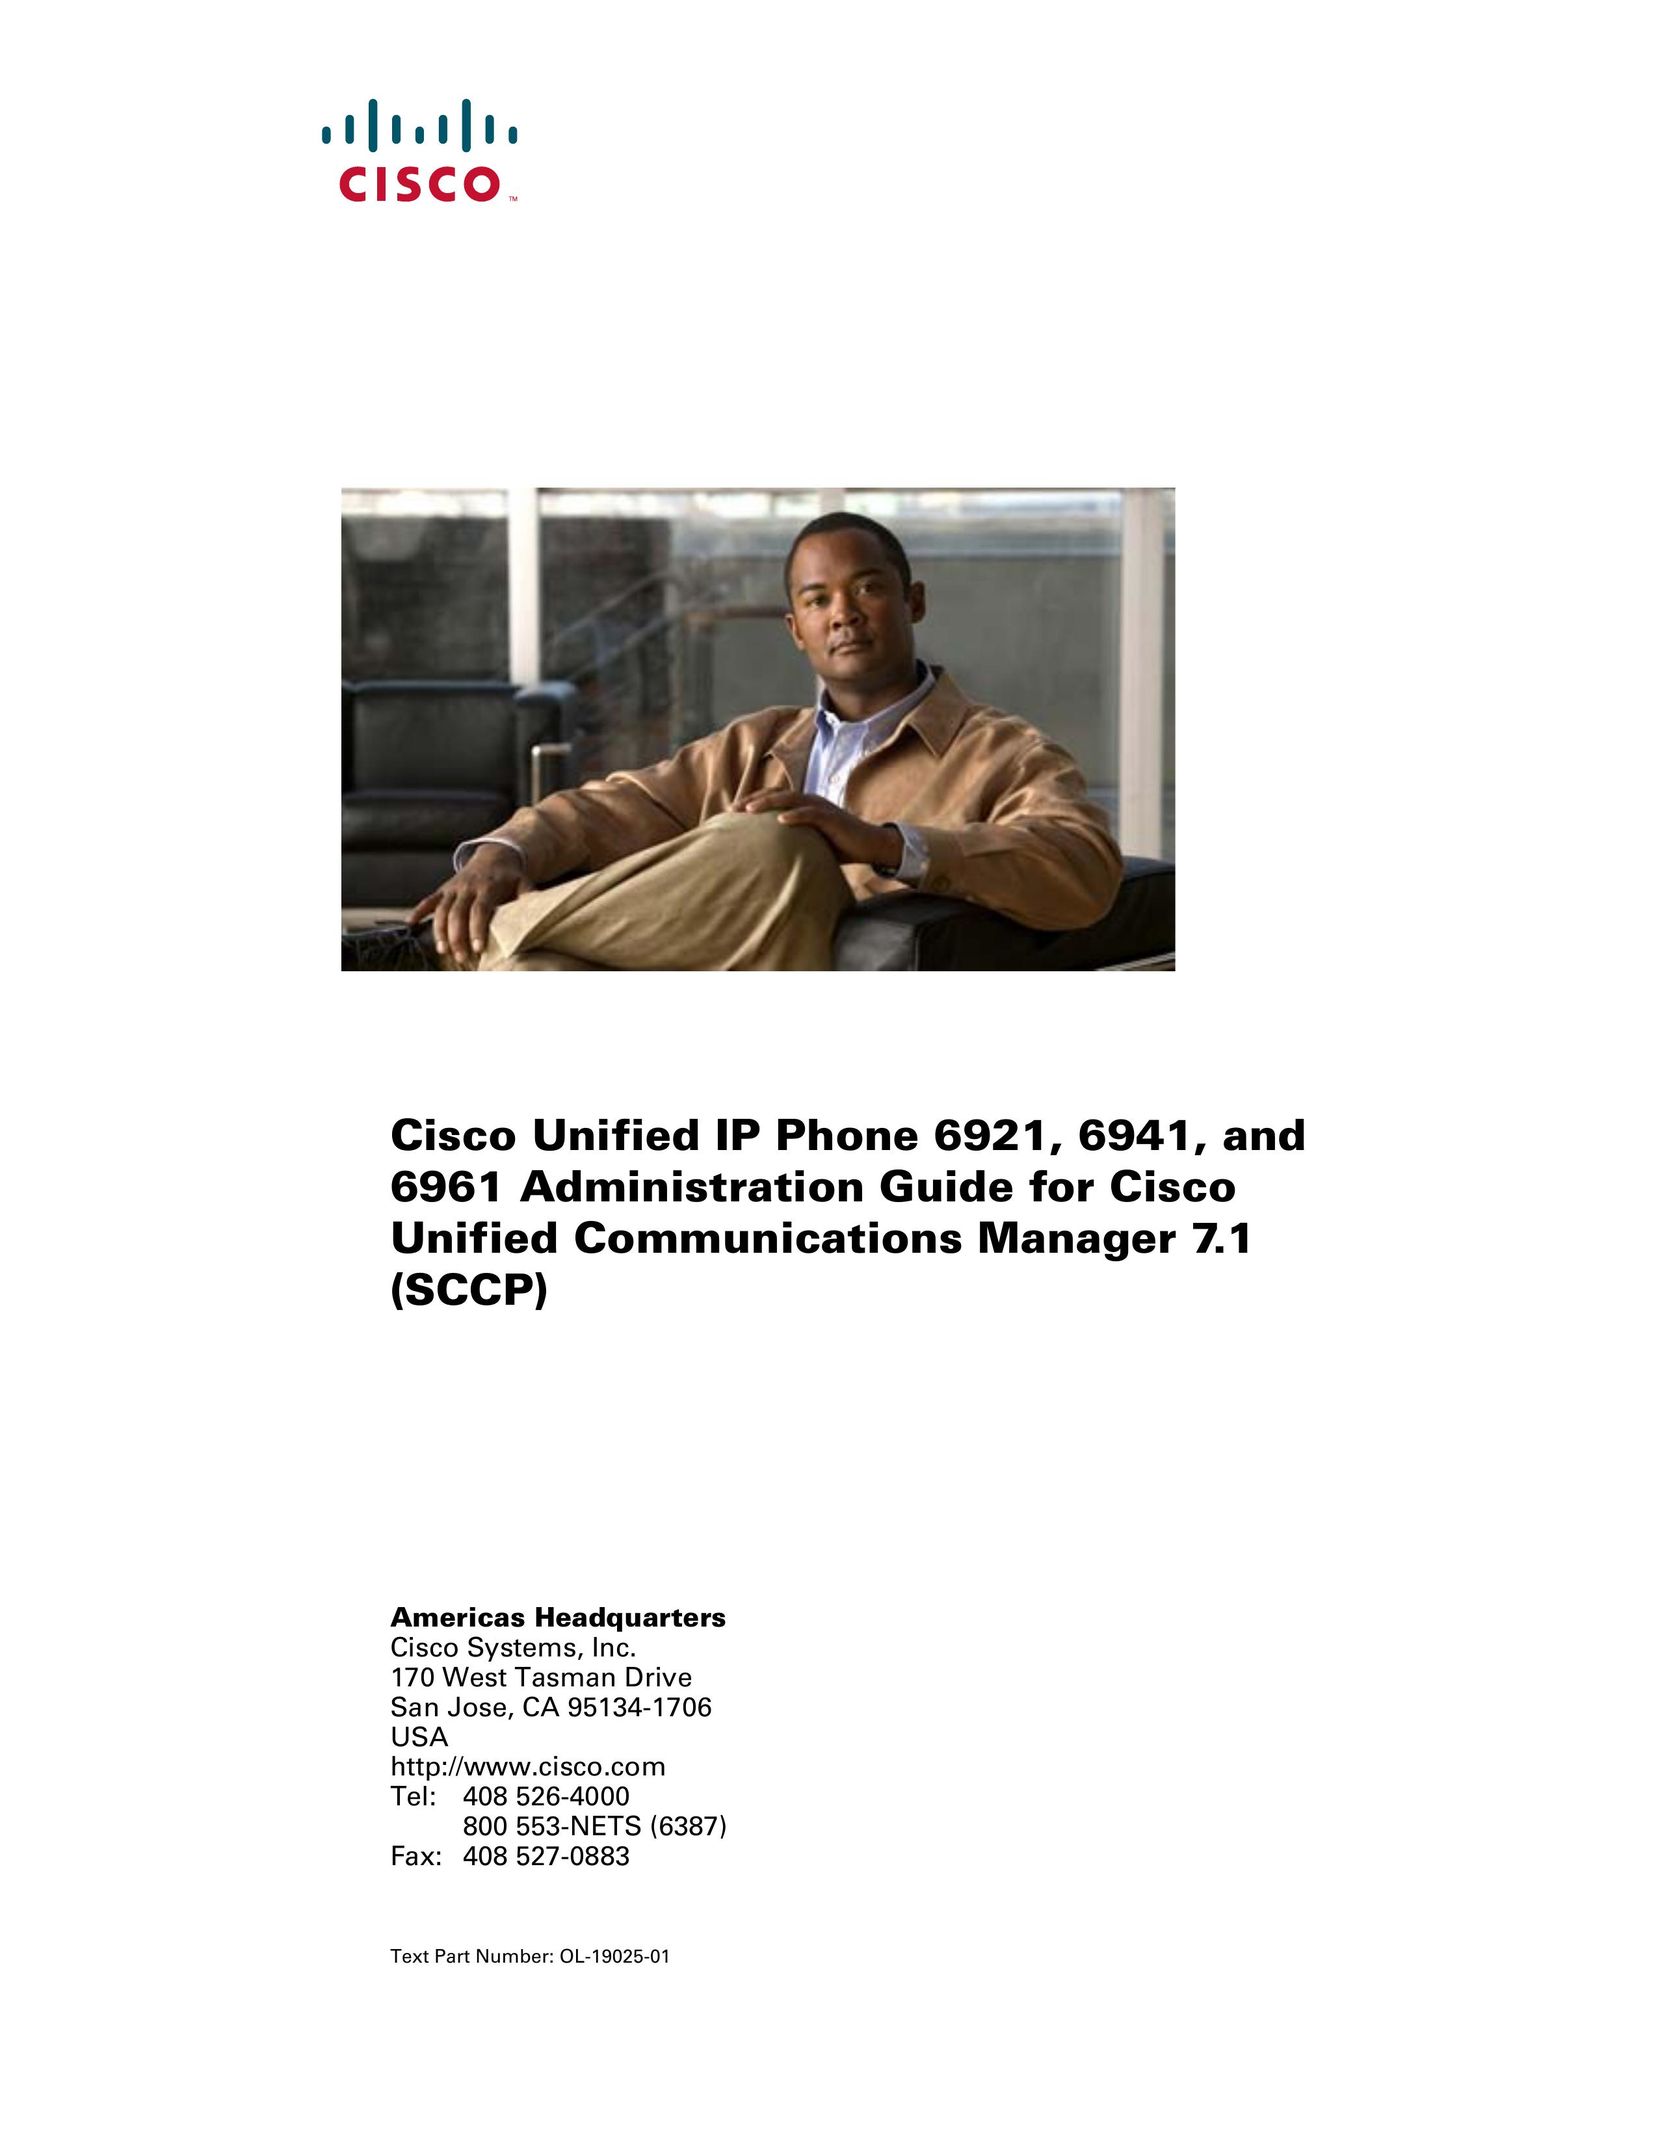 Cisco Systems CP6921CK9 Conference Phone User Manual